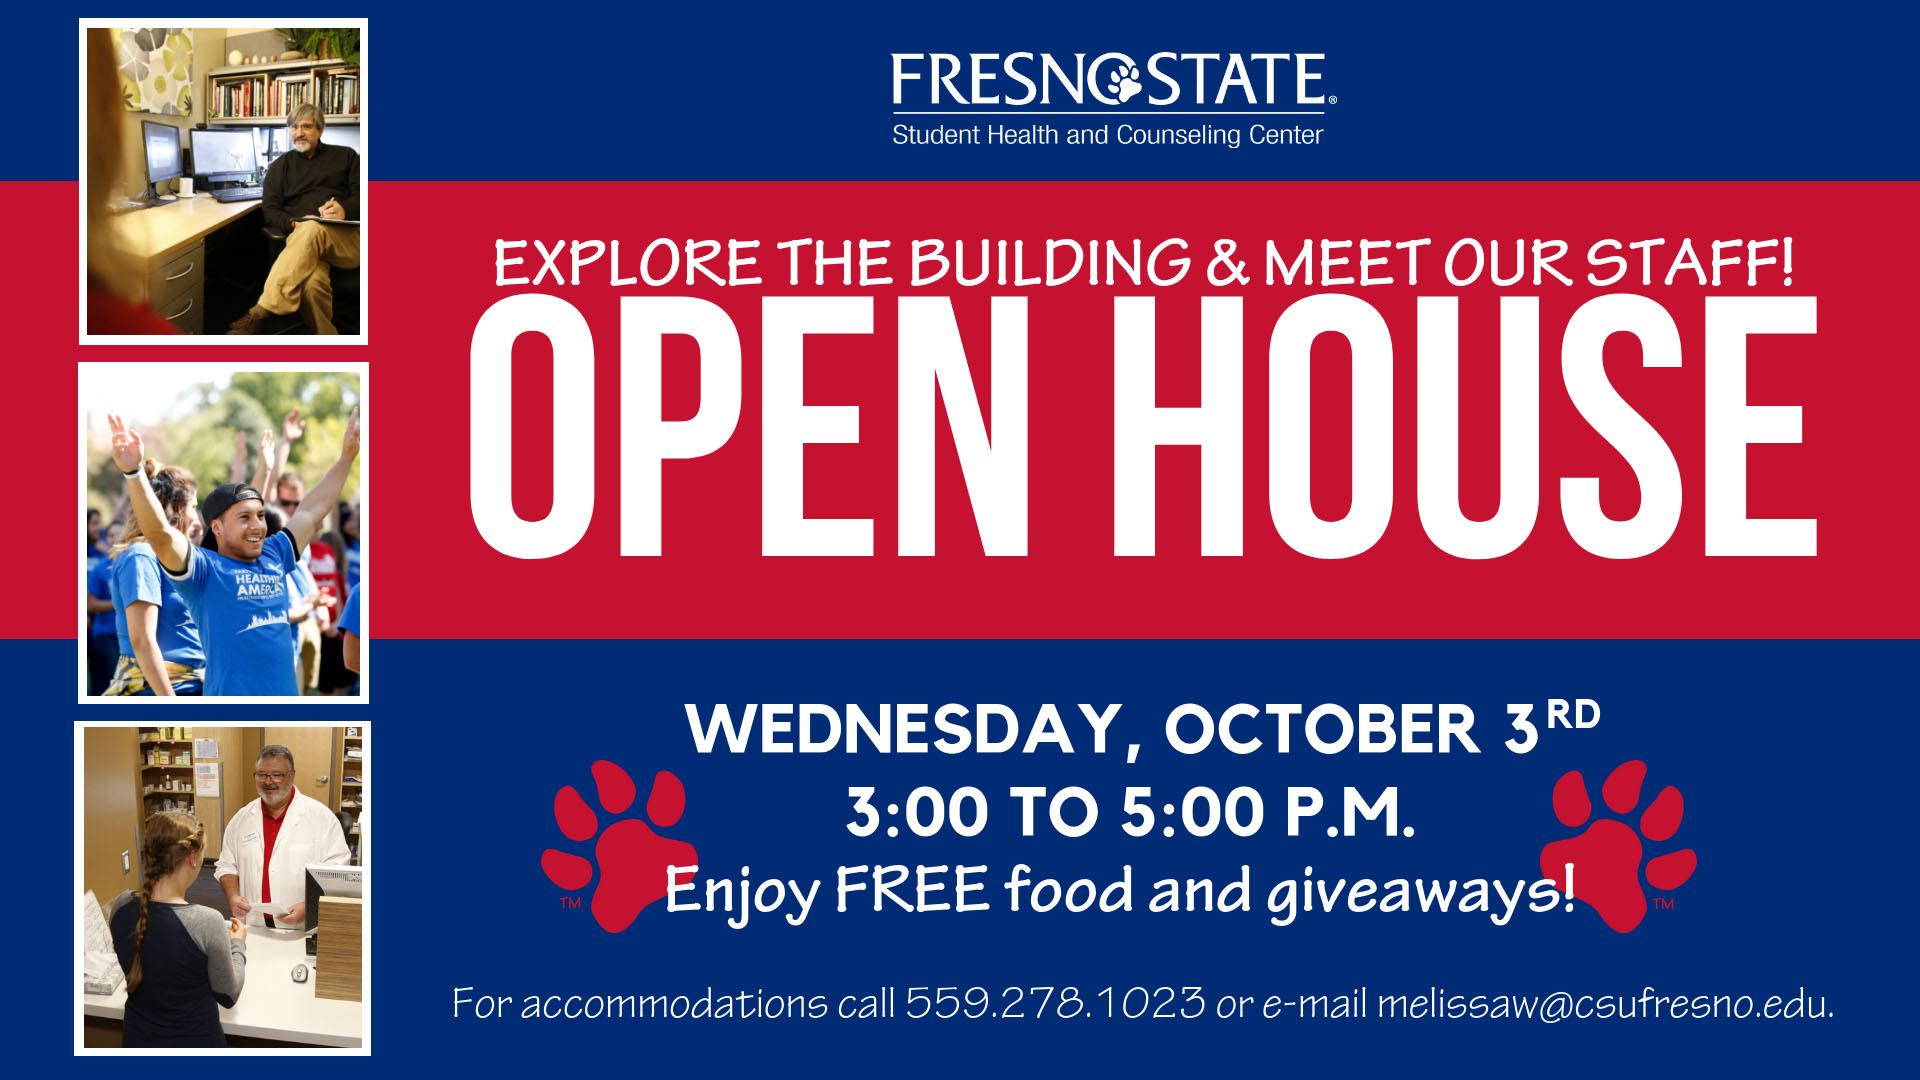 Healthy+Bulldogs%3A+Are+you+a+student+at+Fresno+State%3F+Youre+invited+to+this+event